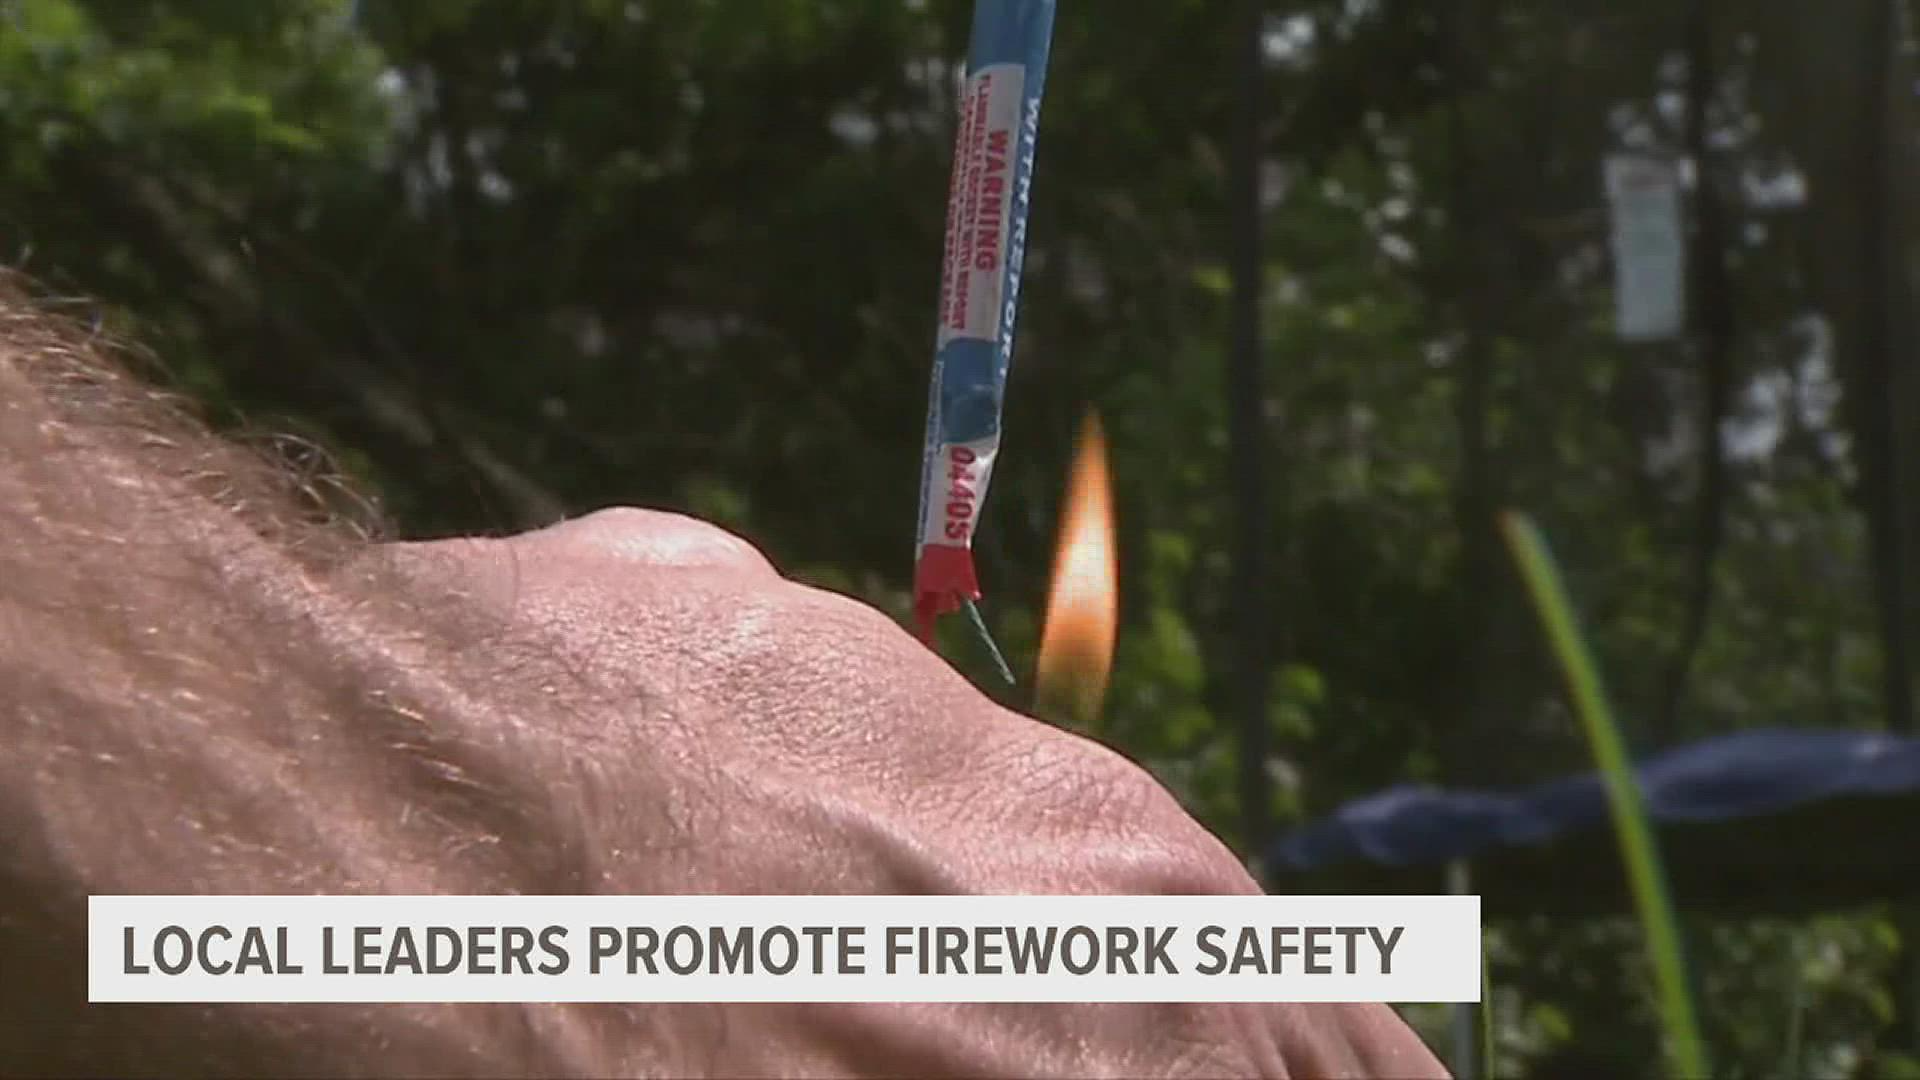 Residents are reminded to follow PA firework laws when celebrating the 4th of July